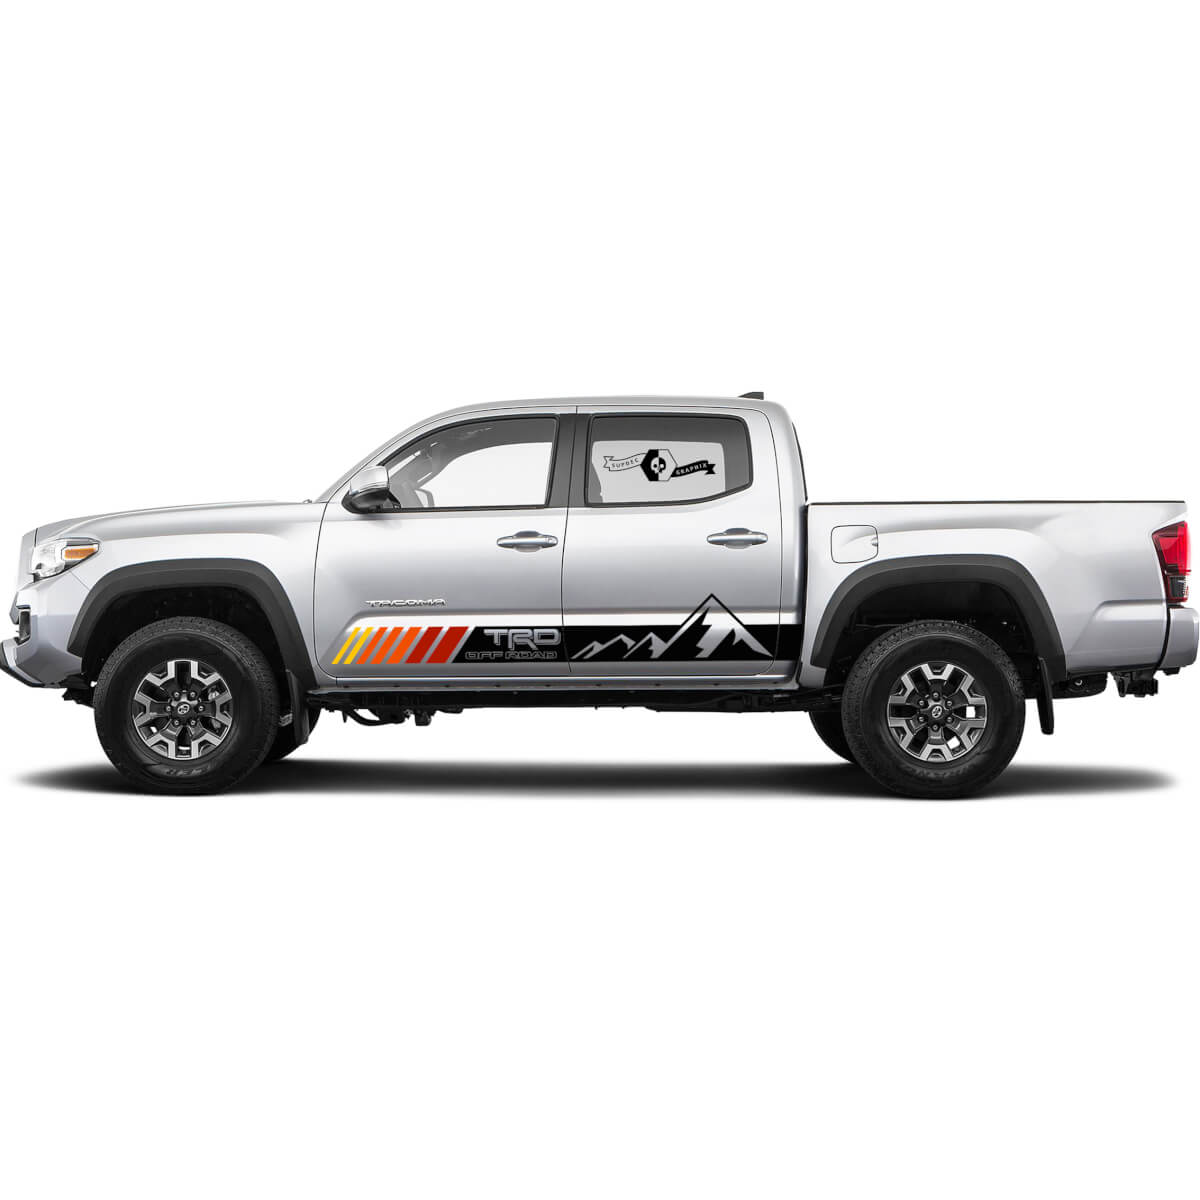 TRD Toyota Racing Development Rocker Panel Mountains stripes Decals Stickers for Tacoma